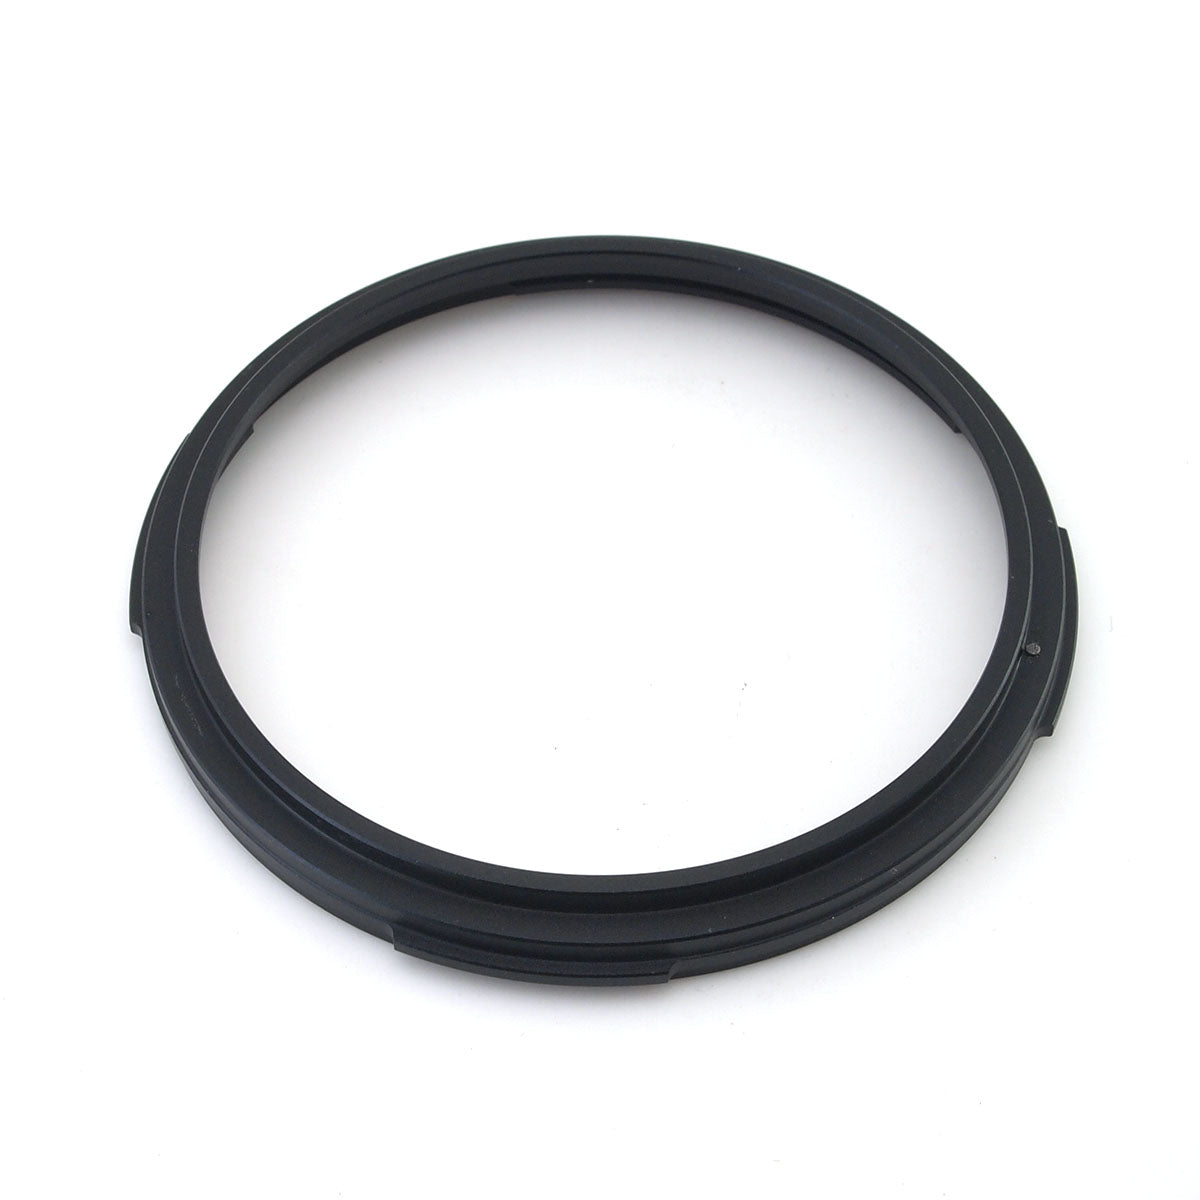 Replacement Metal Lens Filter Adapter Ring for Hasselblad CF lens 50mm 60mm 80mm 100mm 150mm 250mm V mount bayonet